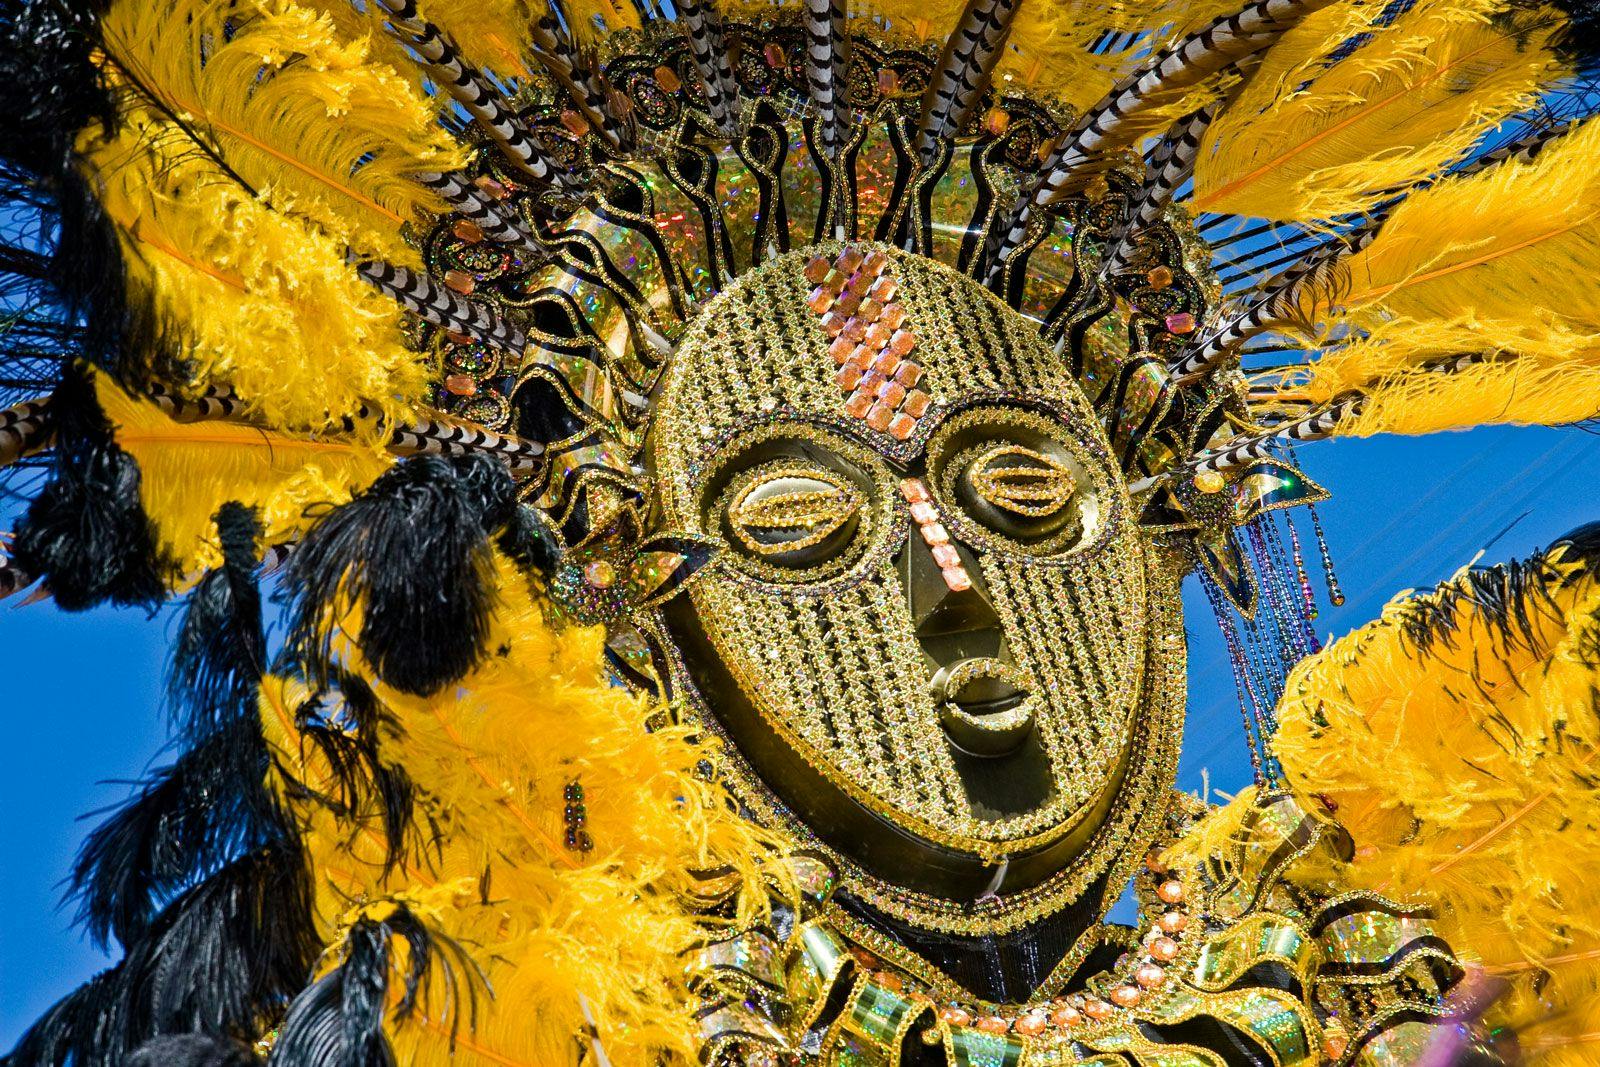 A golden feathered festival mask